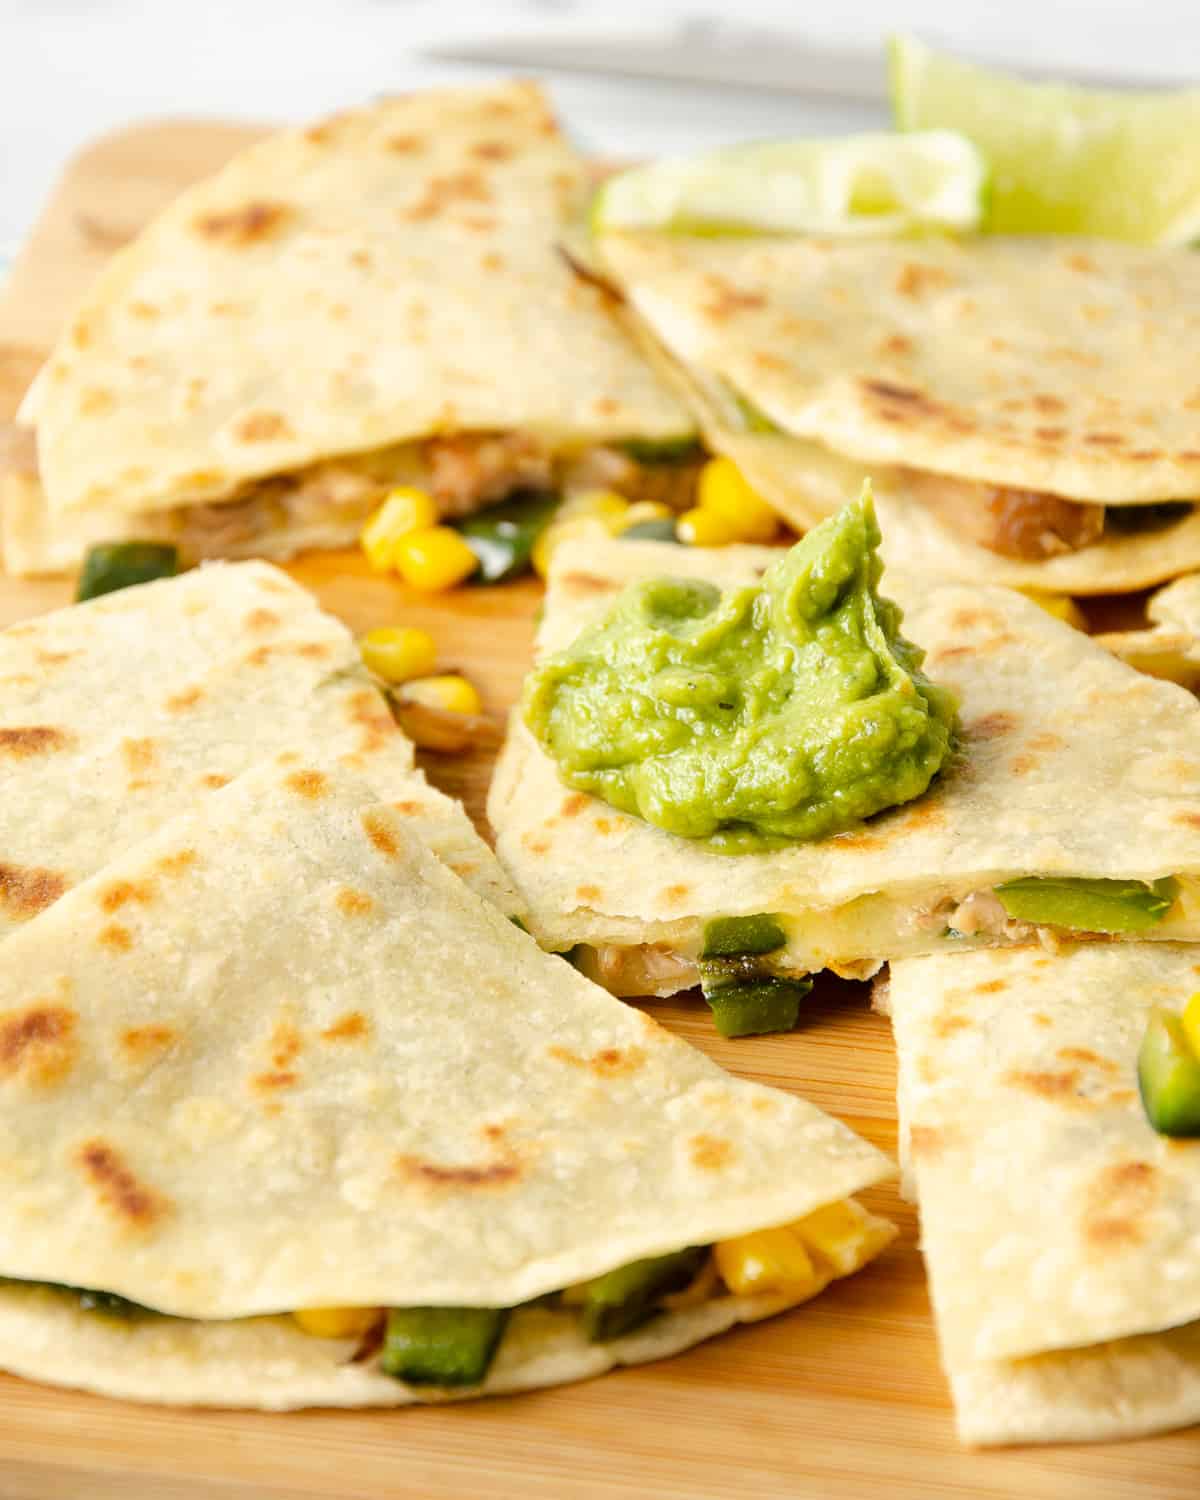 A side view of carnitas quesadillas topped with a dollop of guacamole.